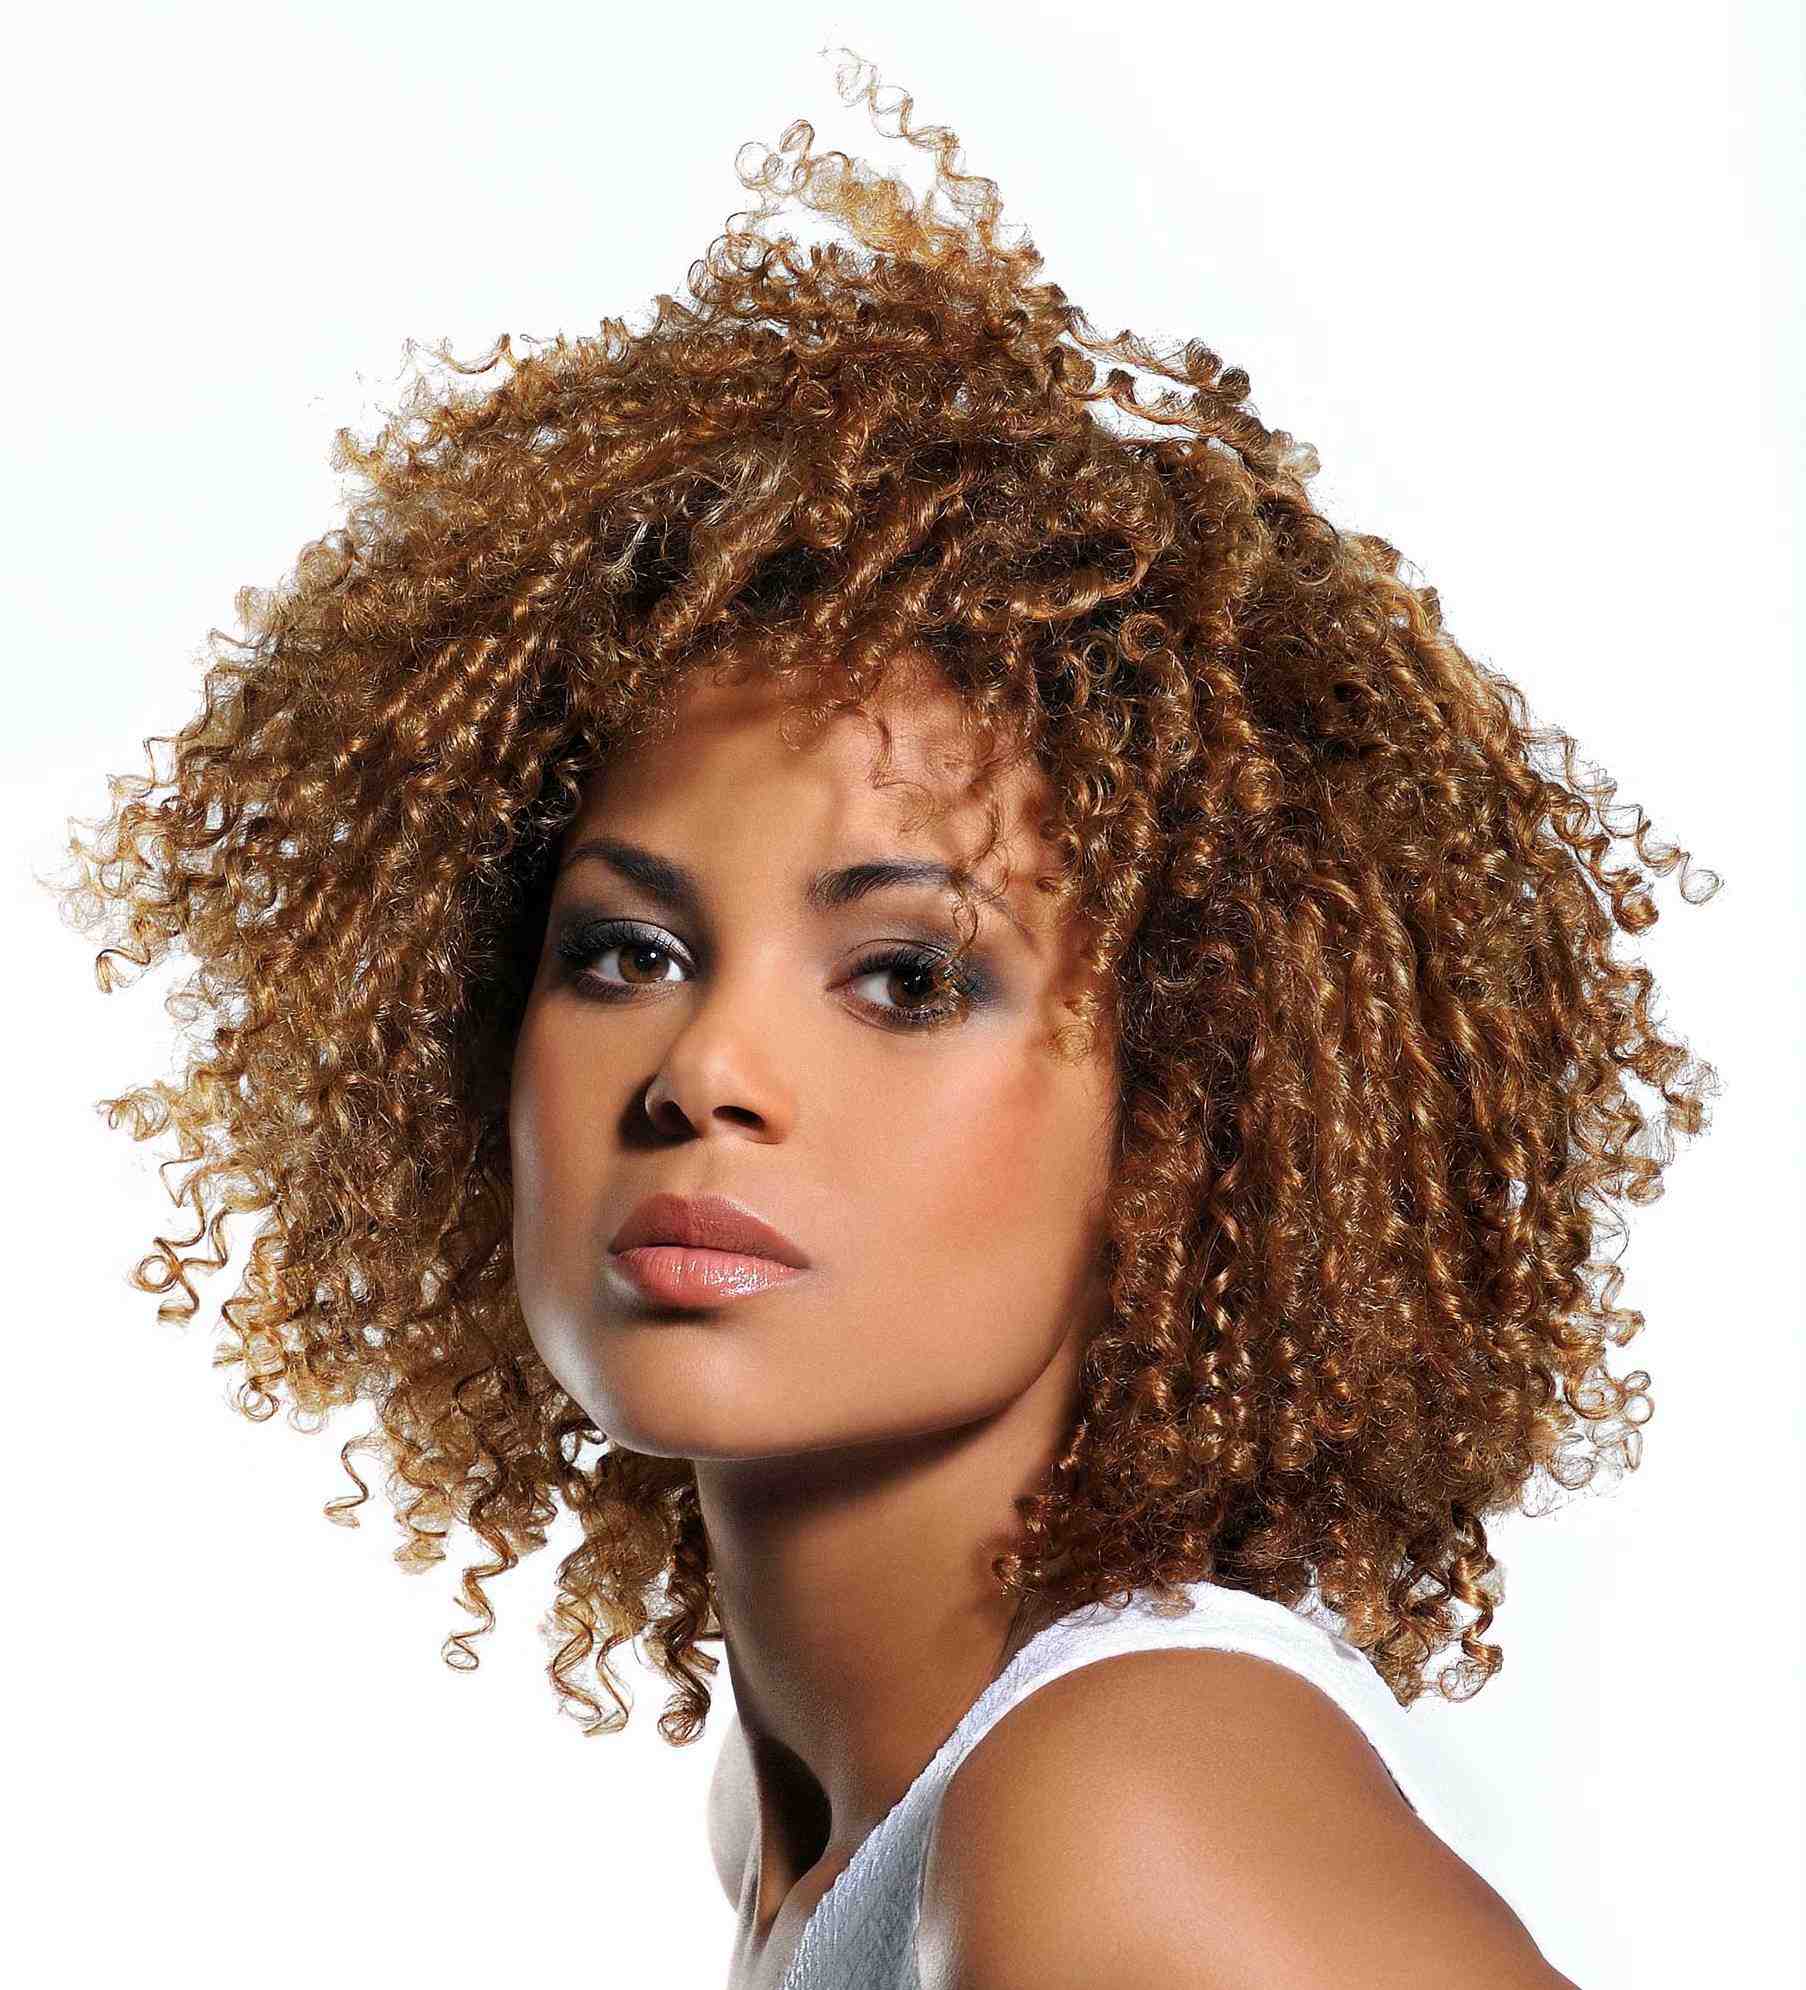 Keep Calm amp; Keep It Curly: Try These Curly Hair Care Tips | @FTER5 